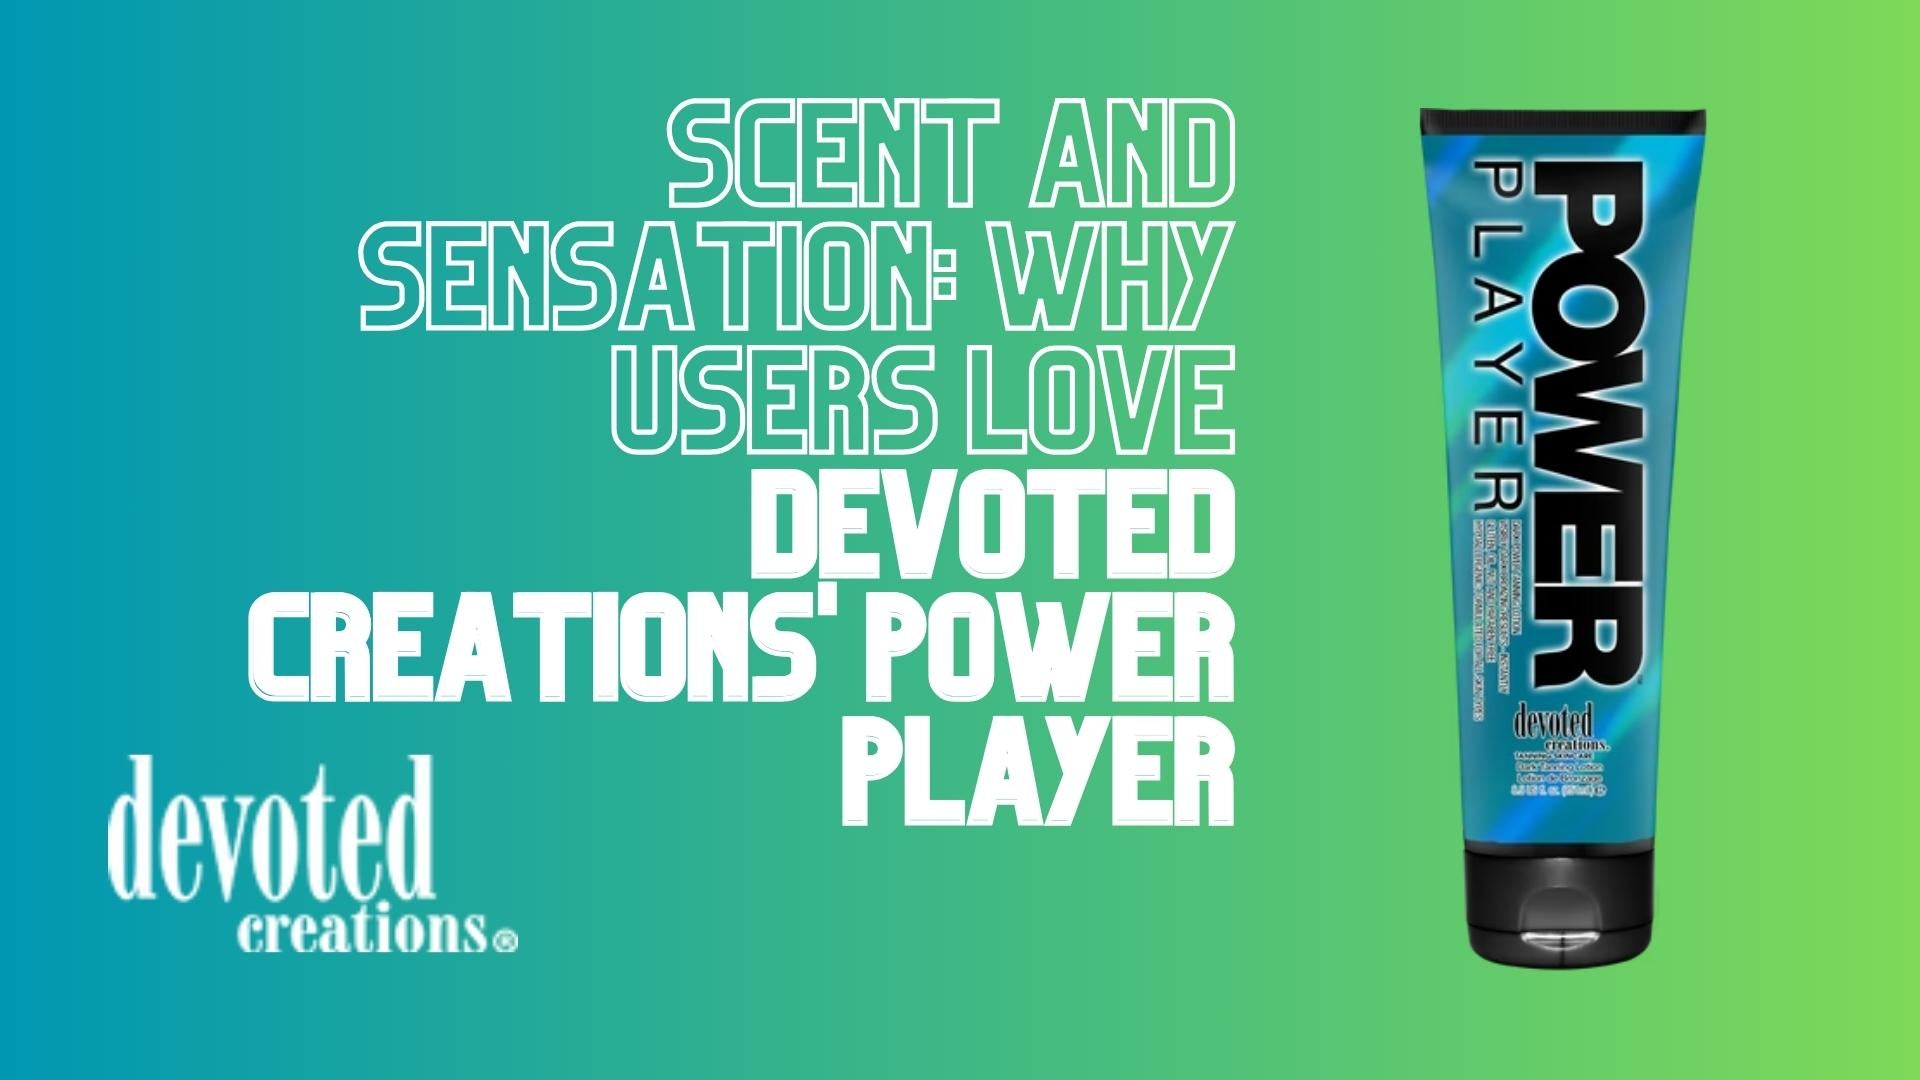 devoted-creations-power-player-scent-scentsations 